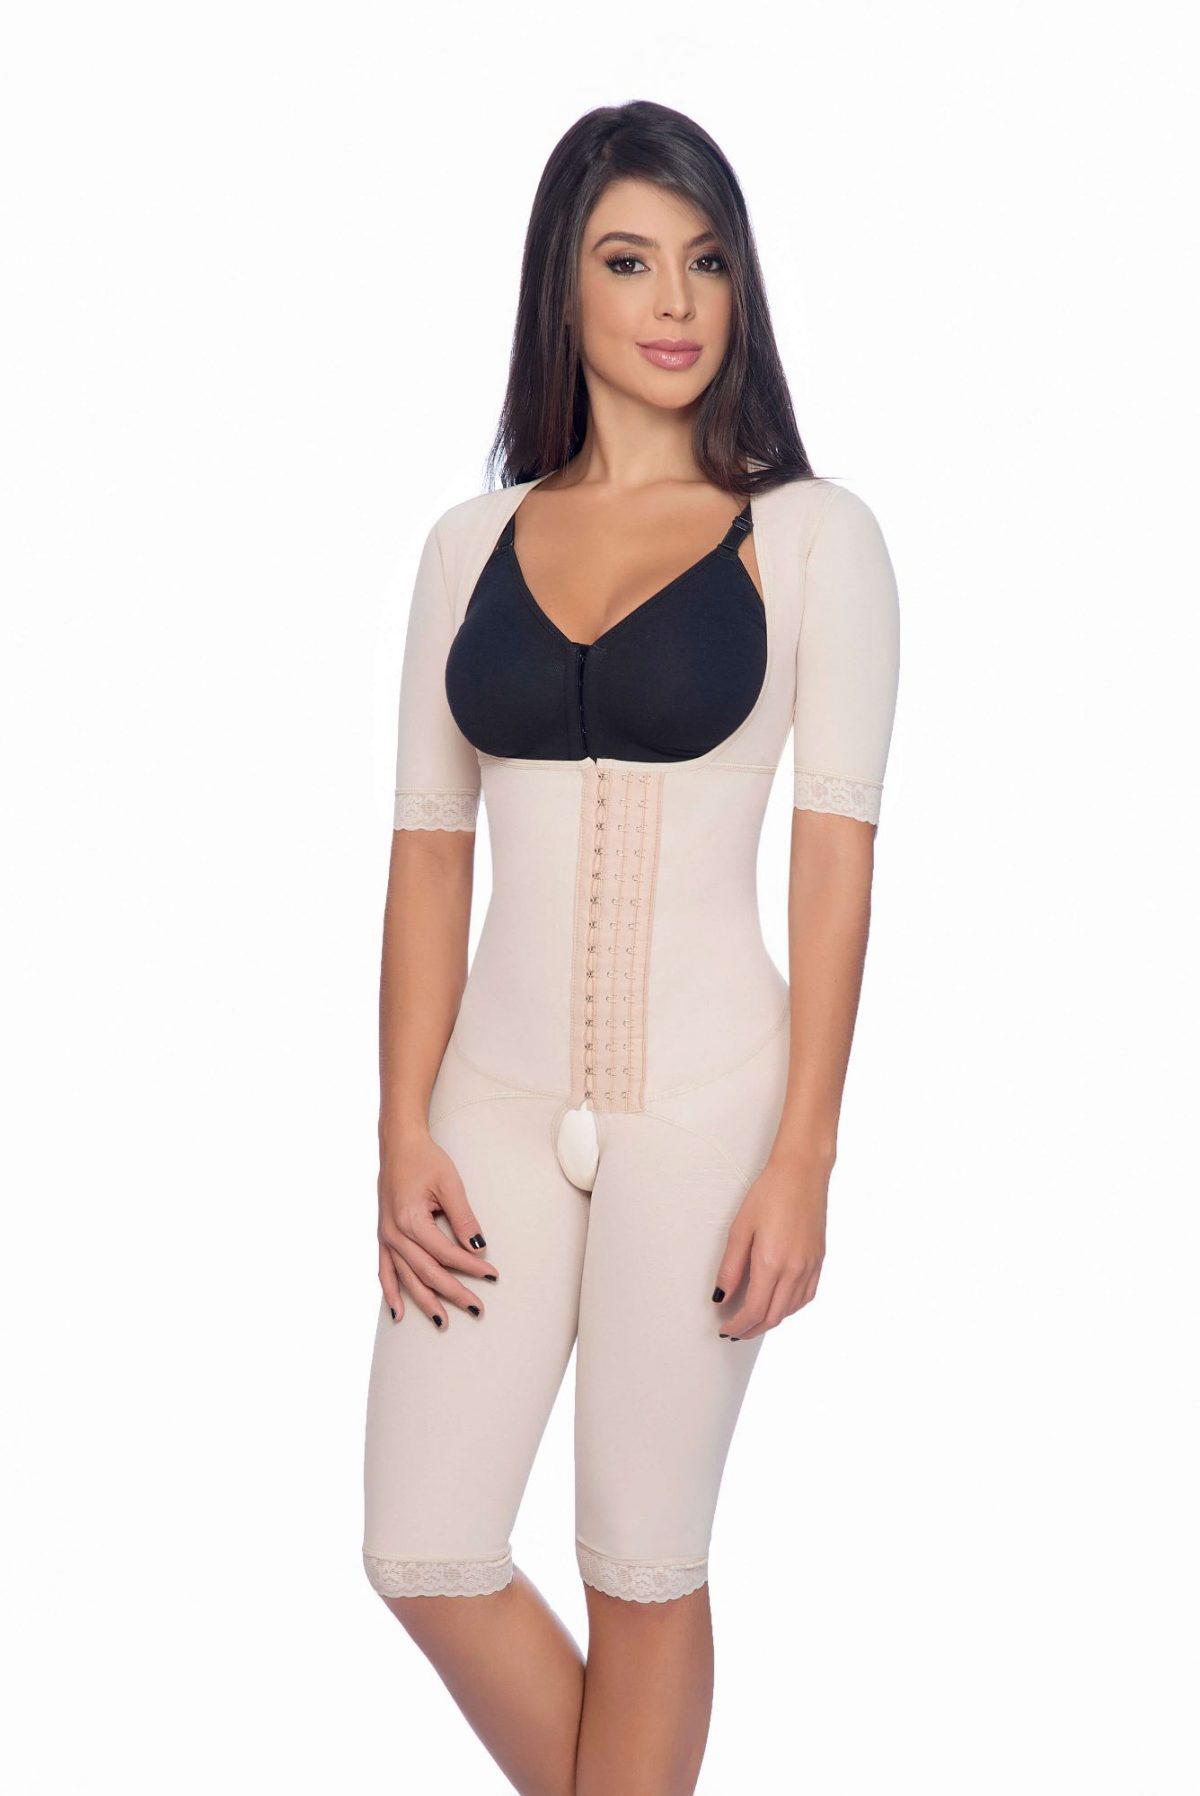 BRALESS FULL BODY ABOVE THE KNEE FAJA WITH SLEEVES AND HOOK CLOSURE